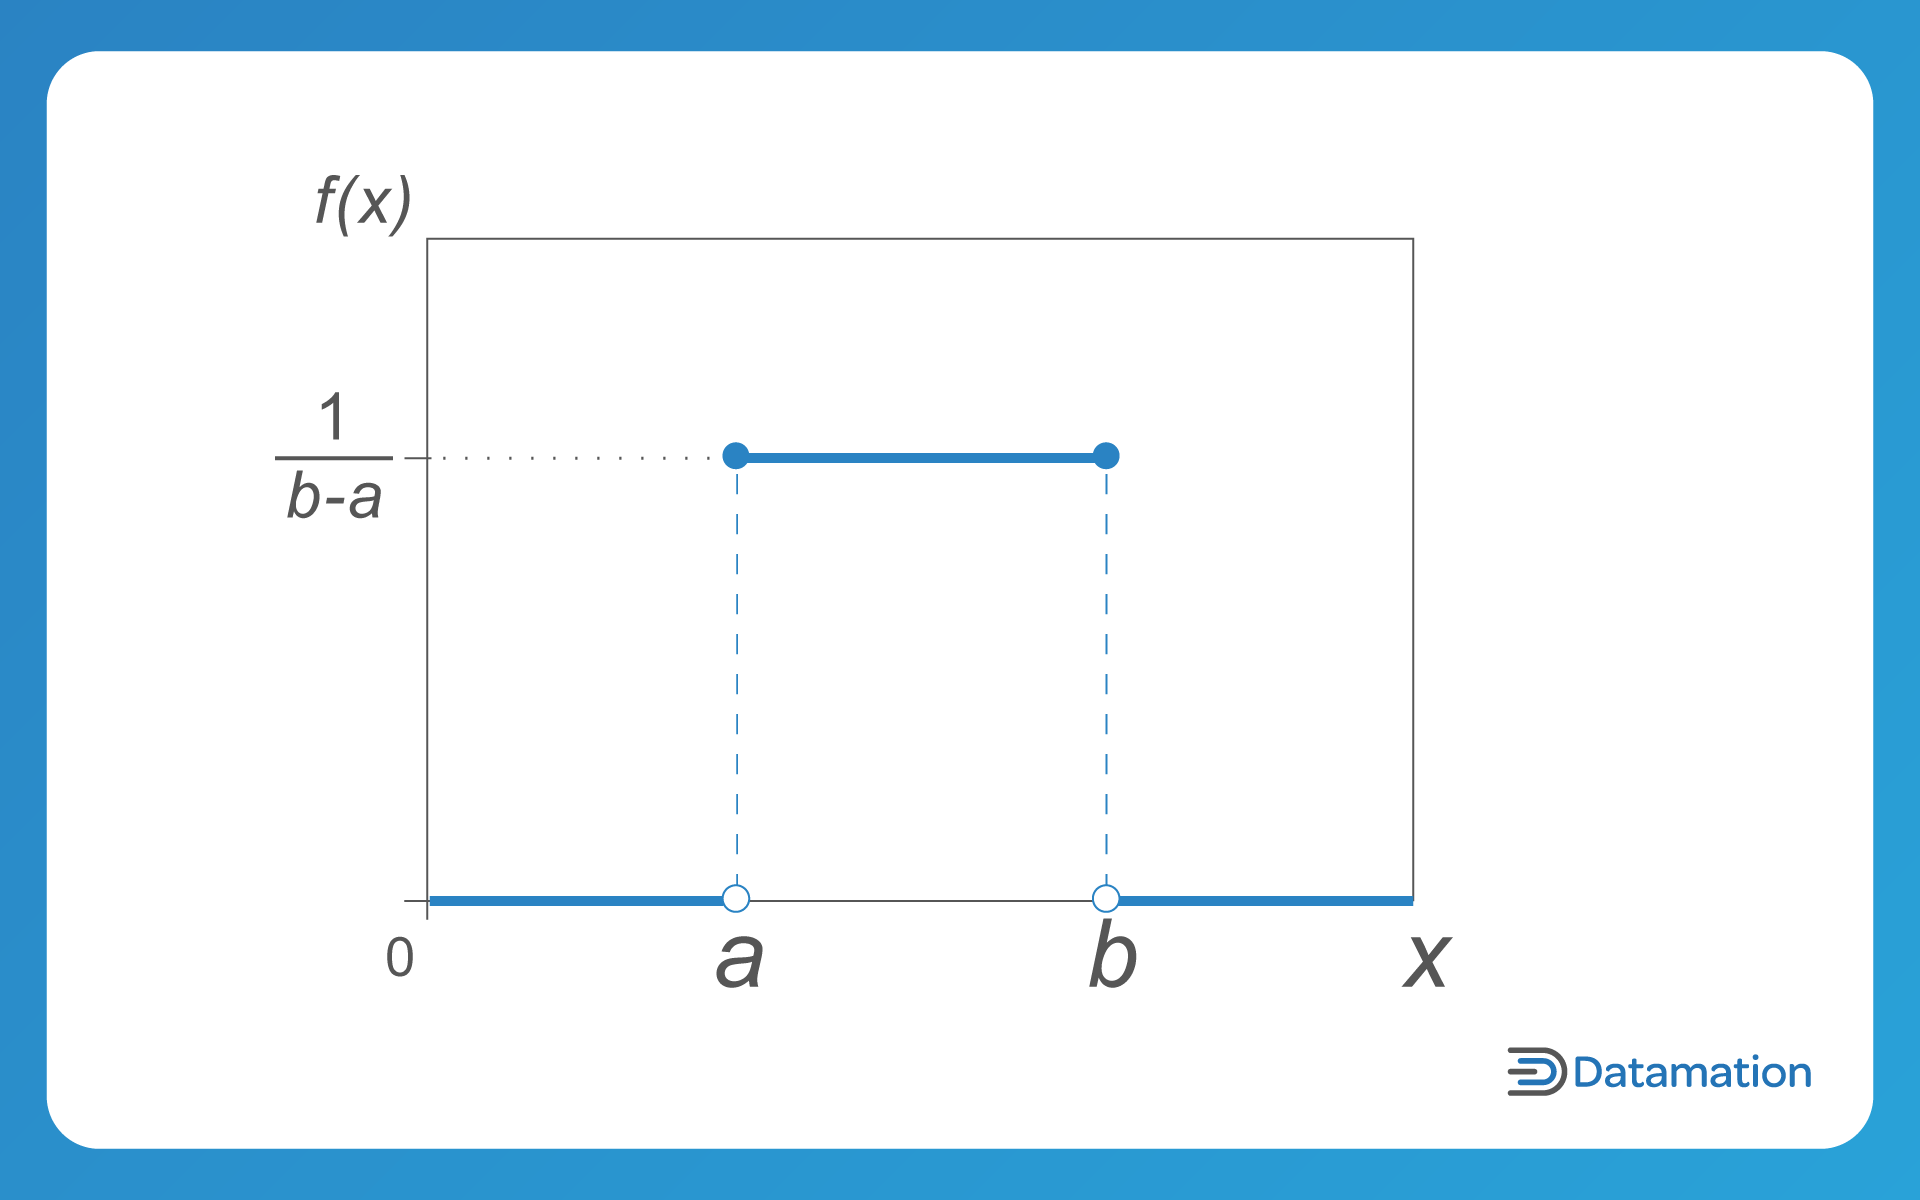 A uniform distribution looks like a rectangle when plotted out on a graph.